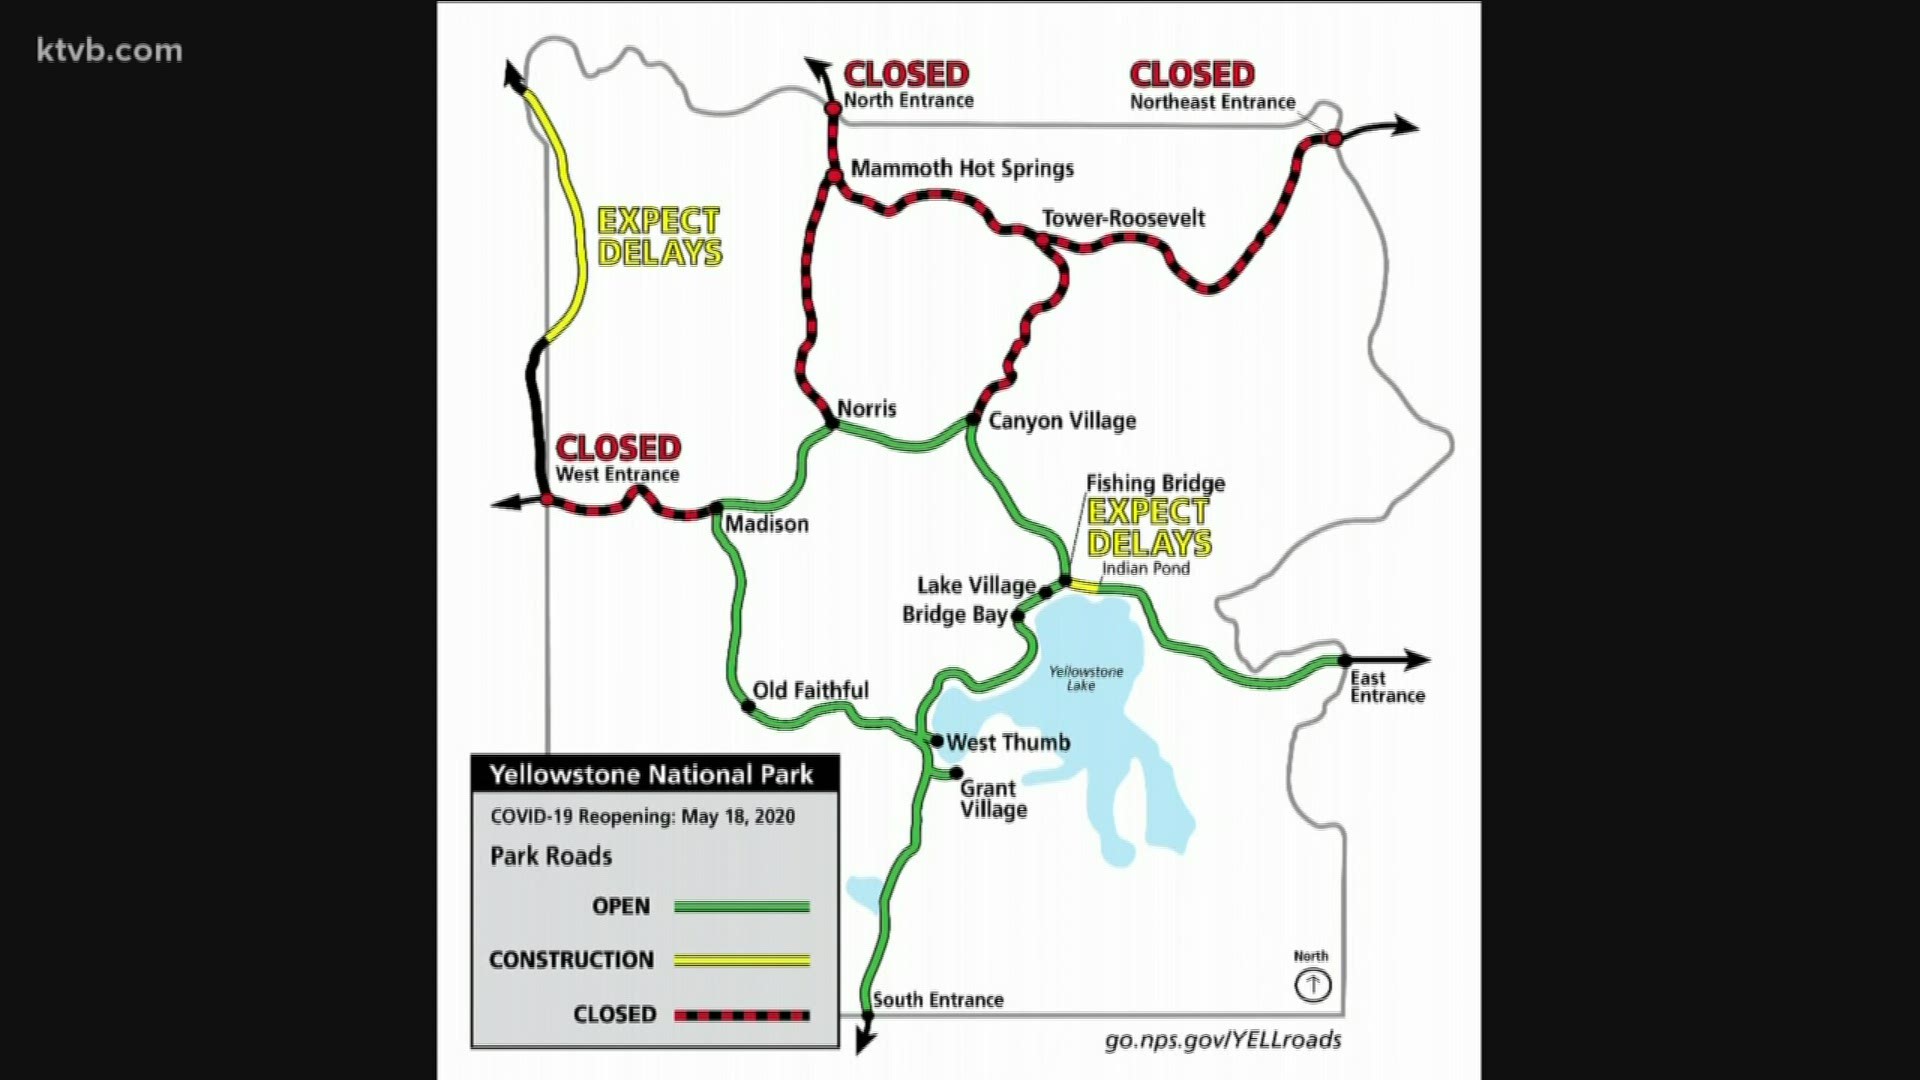 Tamarack's first phase of reopening takes place this Saturday, May 16. Yellowstone released a map of roads that will be open in the national park.